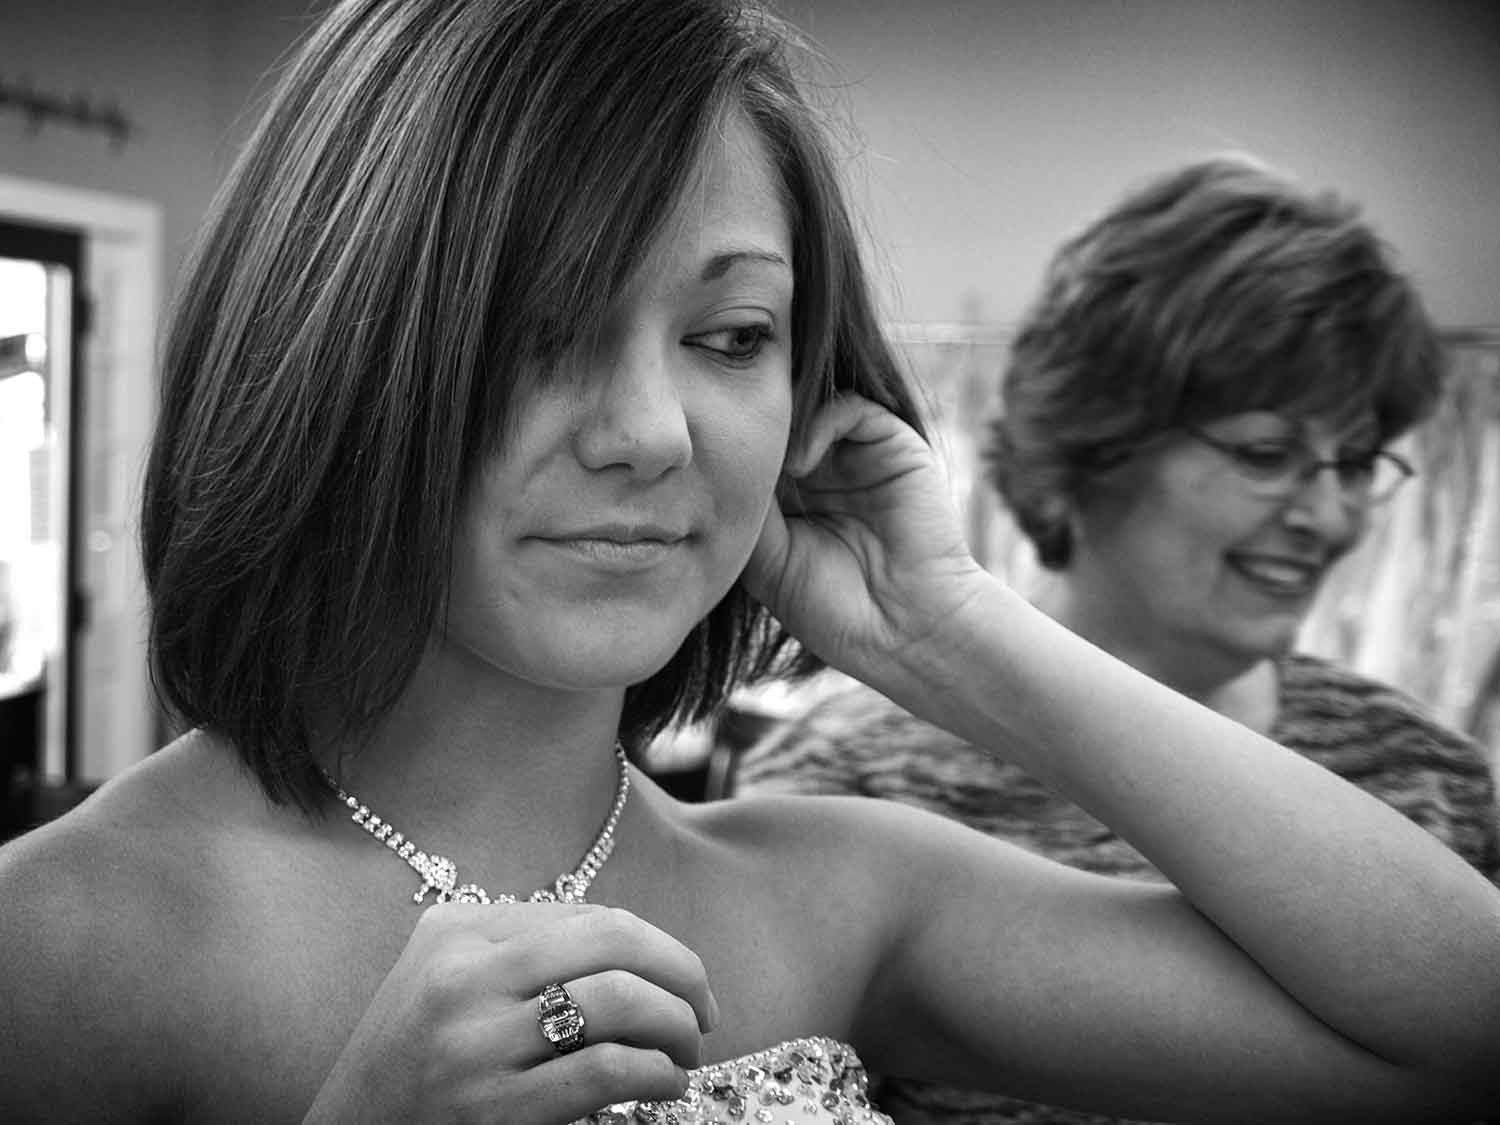 With prom season in the air, the hunt for the perfect dress, shoes and finishing touches ensues. Those are exactly what Veronica England finds at “I Do” Weddings and Flowers. photos by Amber Fenske - 2009